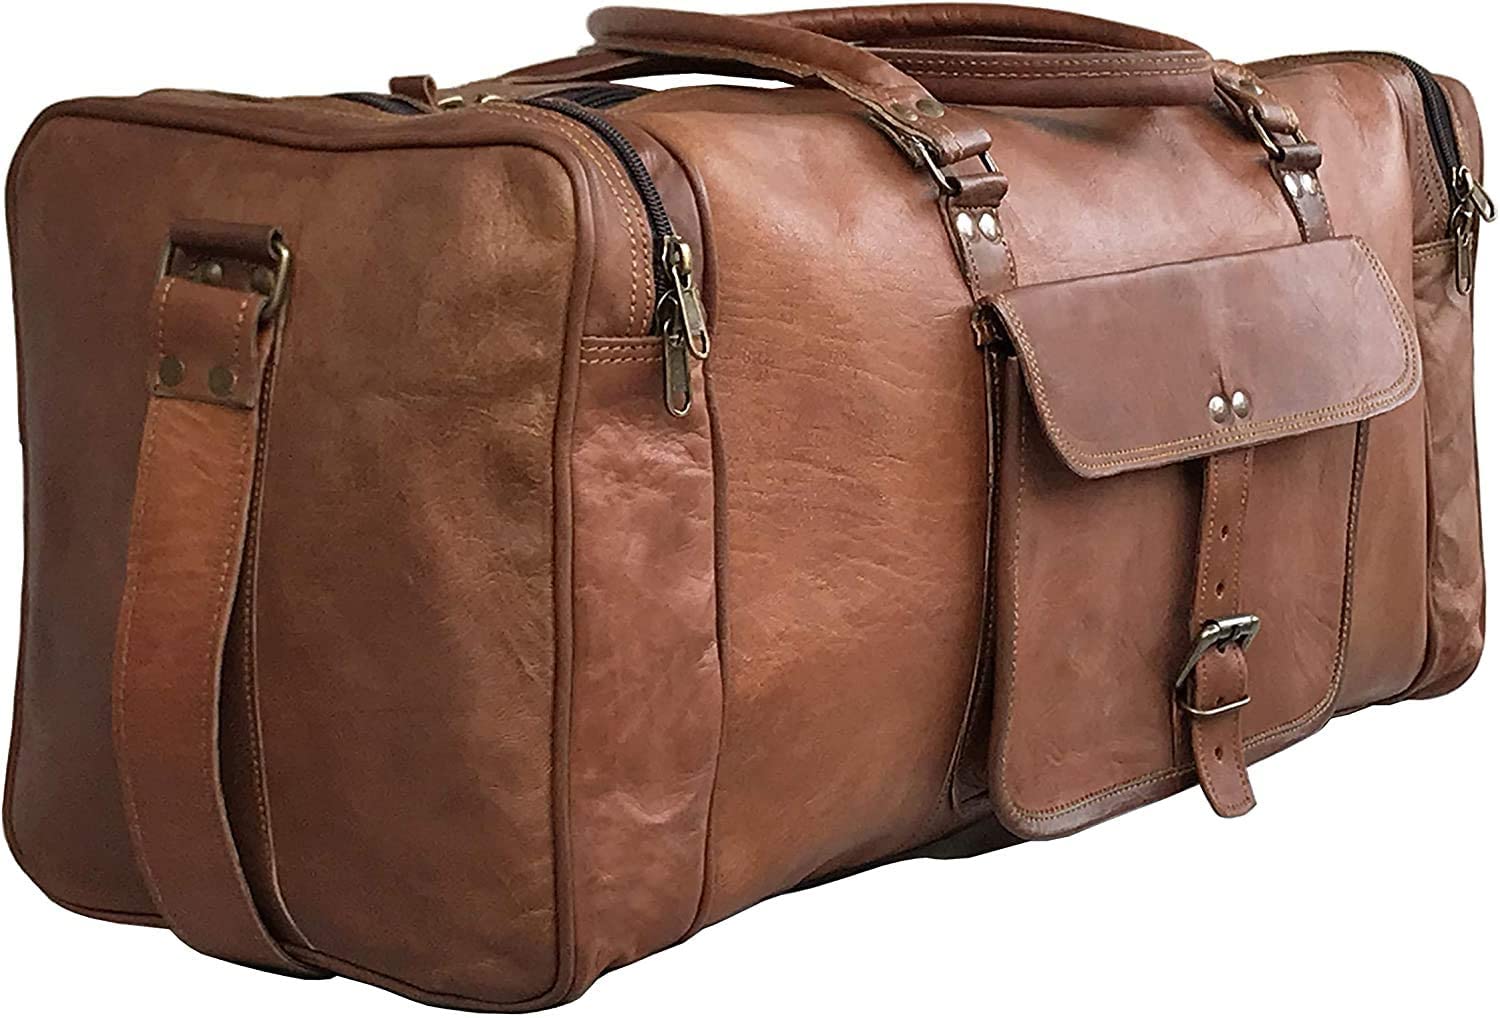 Large Leather Duffel Travel Bag